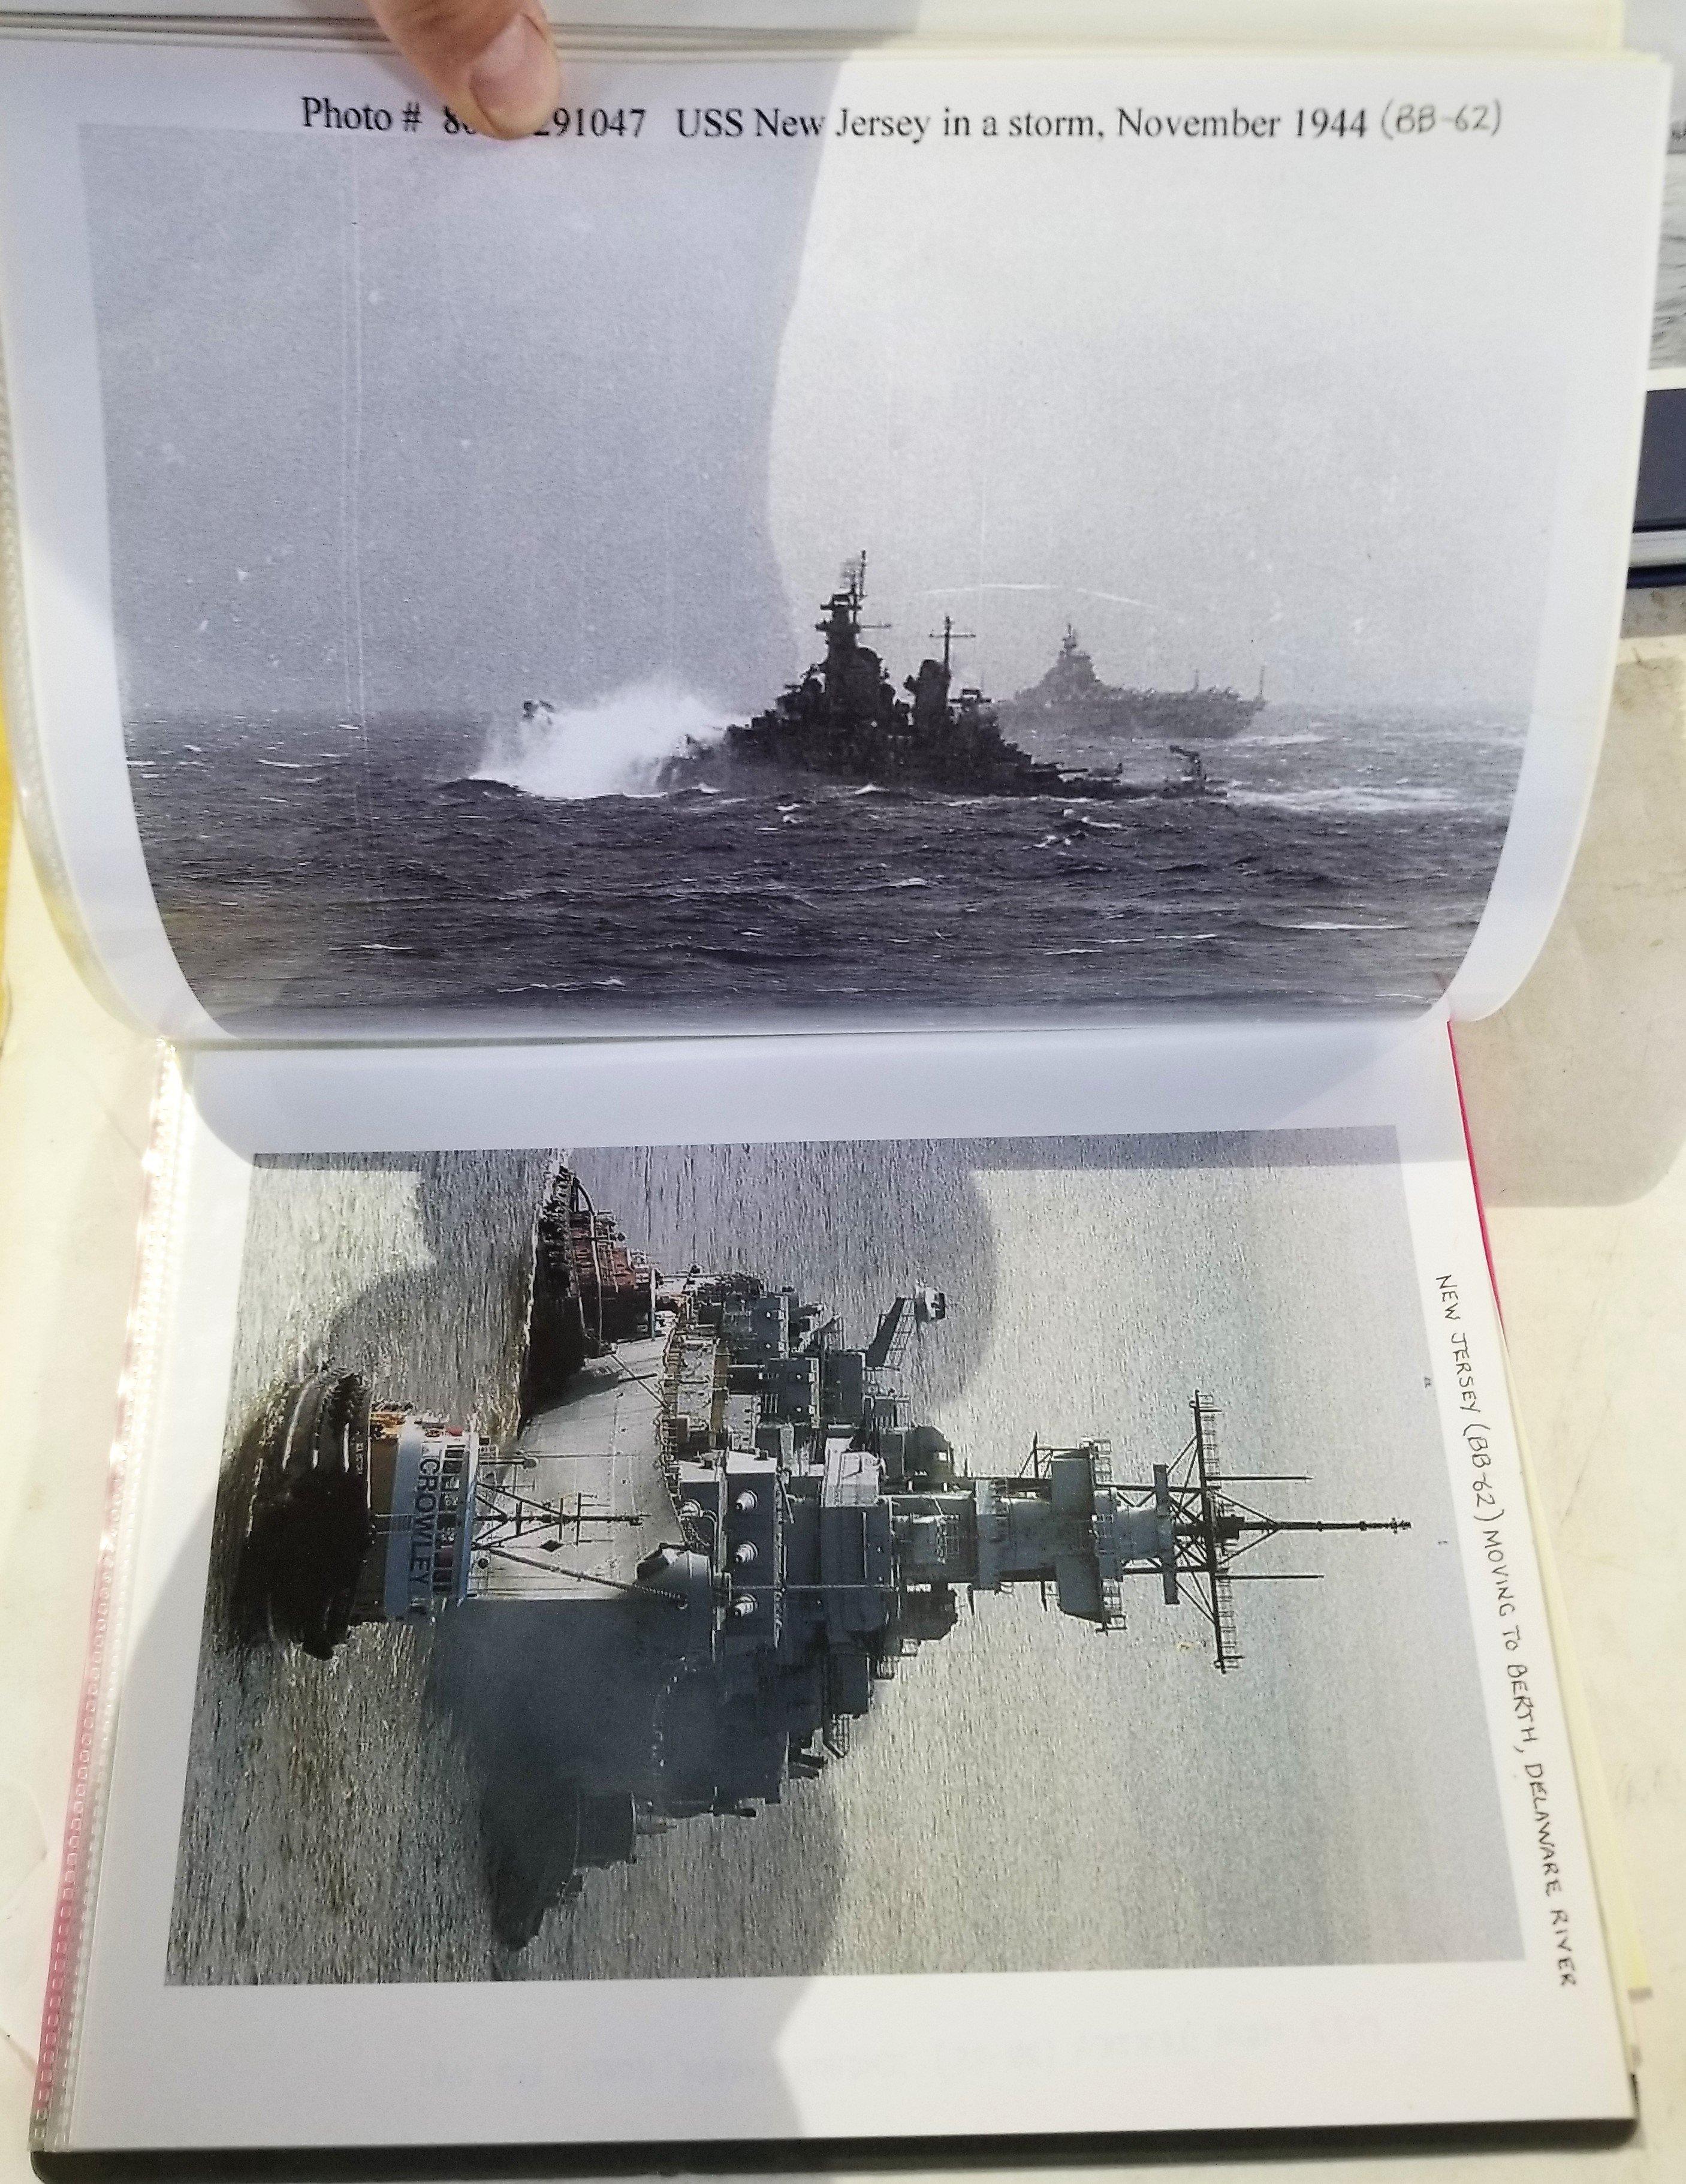 Two (2) U.S. Navy Photo Albums (8"X10" Photos) and One (1) Framed Photo of an Aircraft Carrier